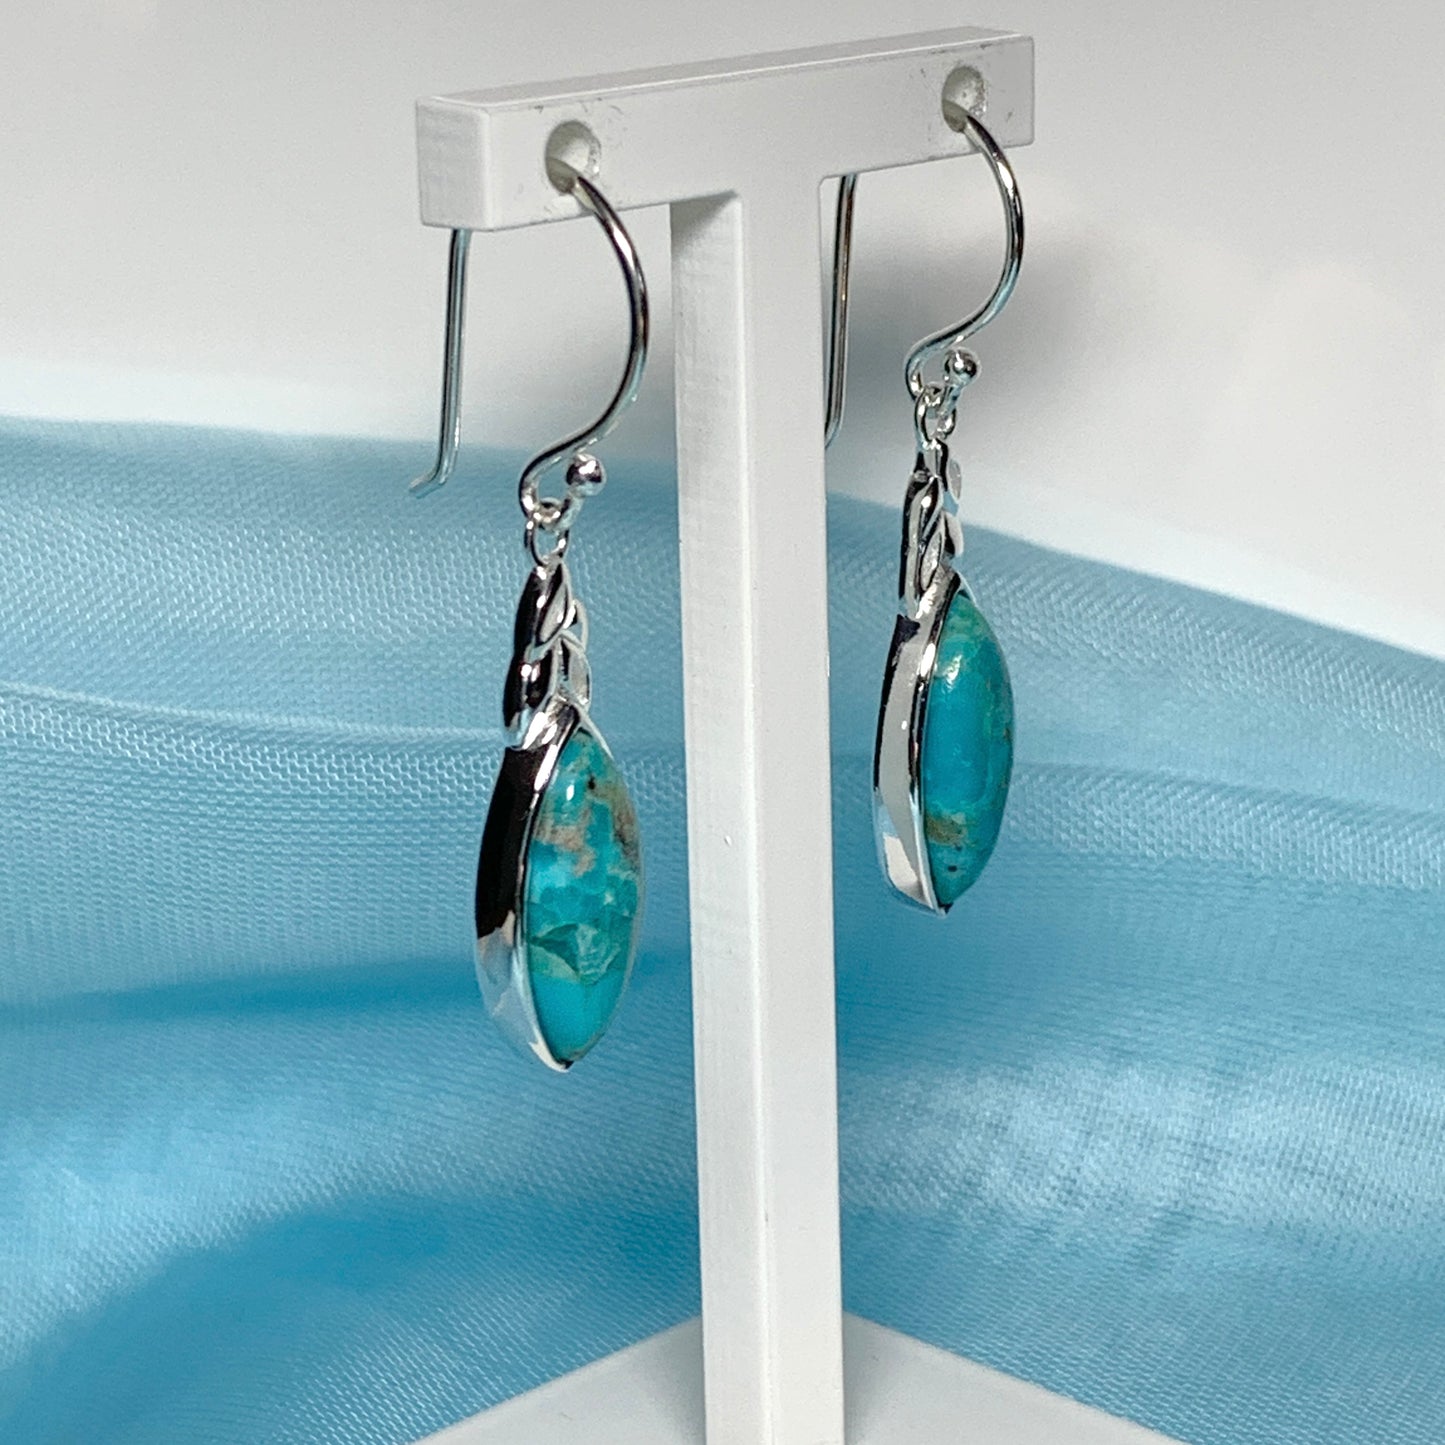 Turquoise earrings drop marquise cut sterling silver